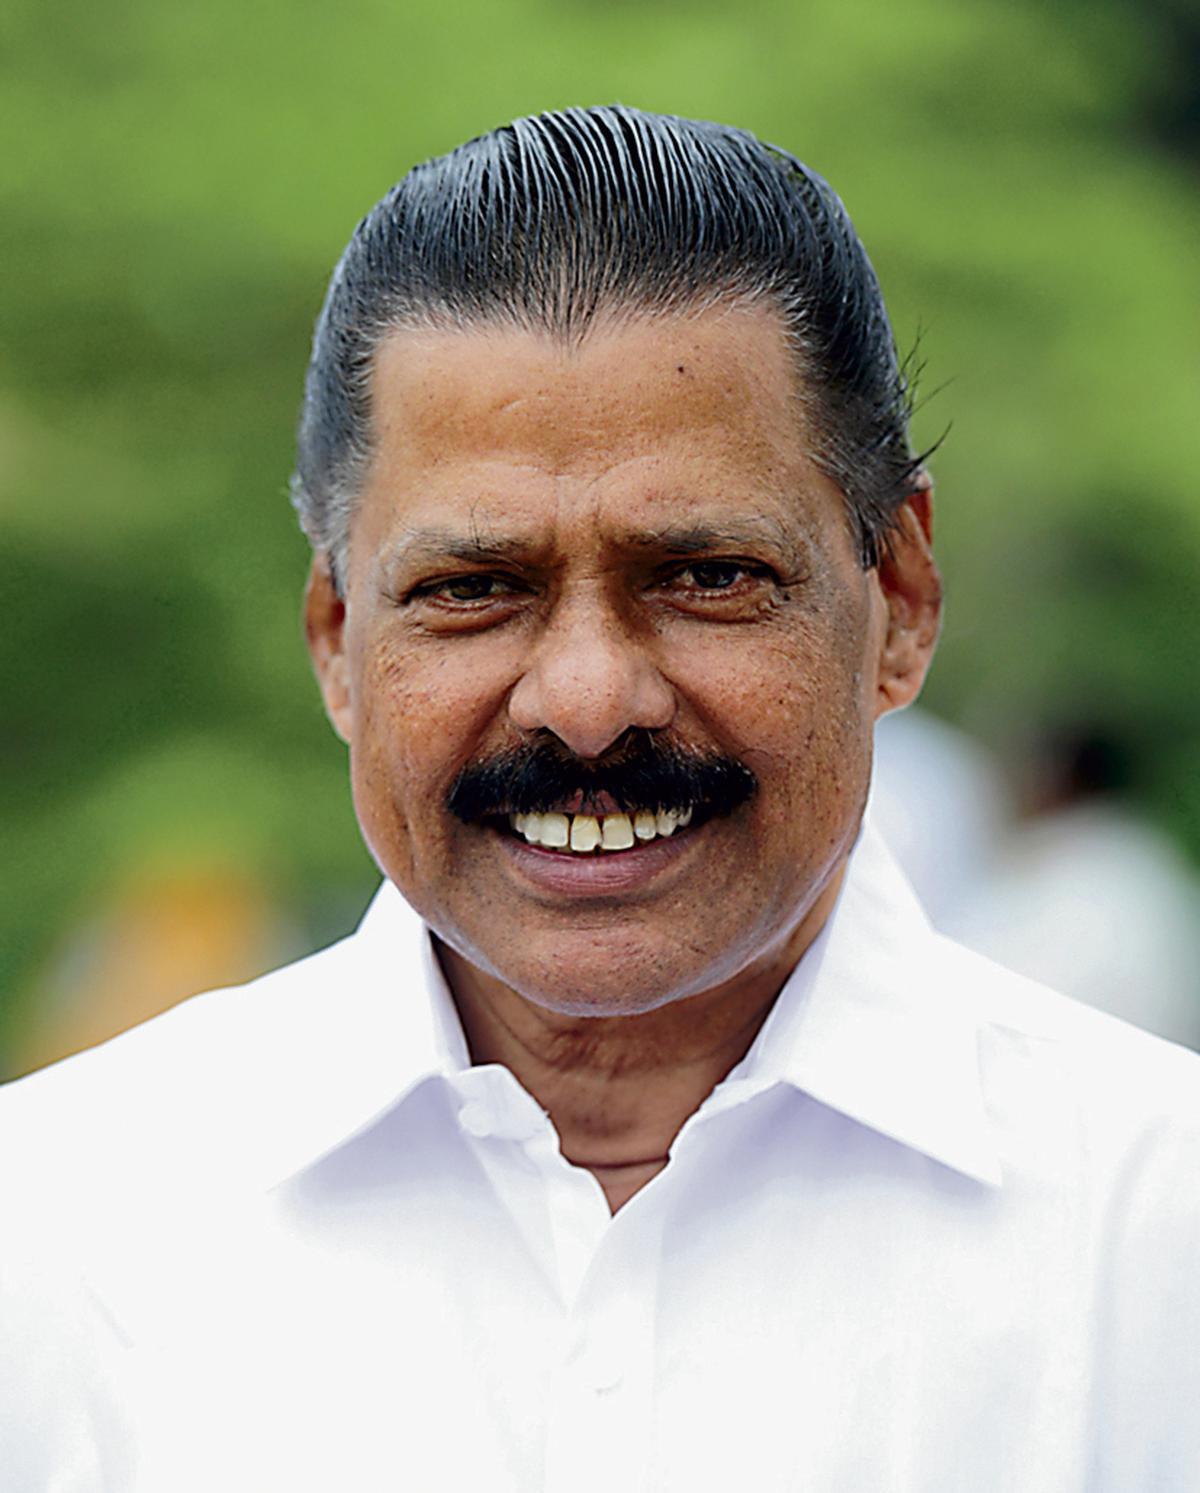 Govt. will decide on removal of Governor from Chancellor’s position, says M.V. Govindan